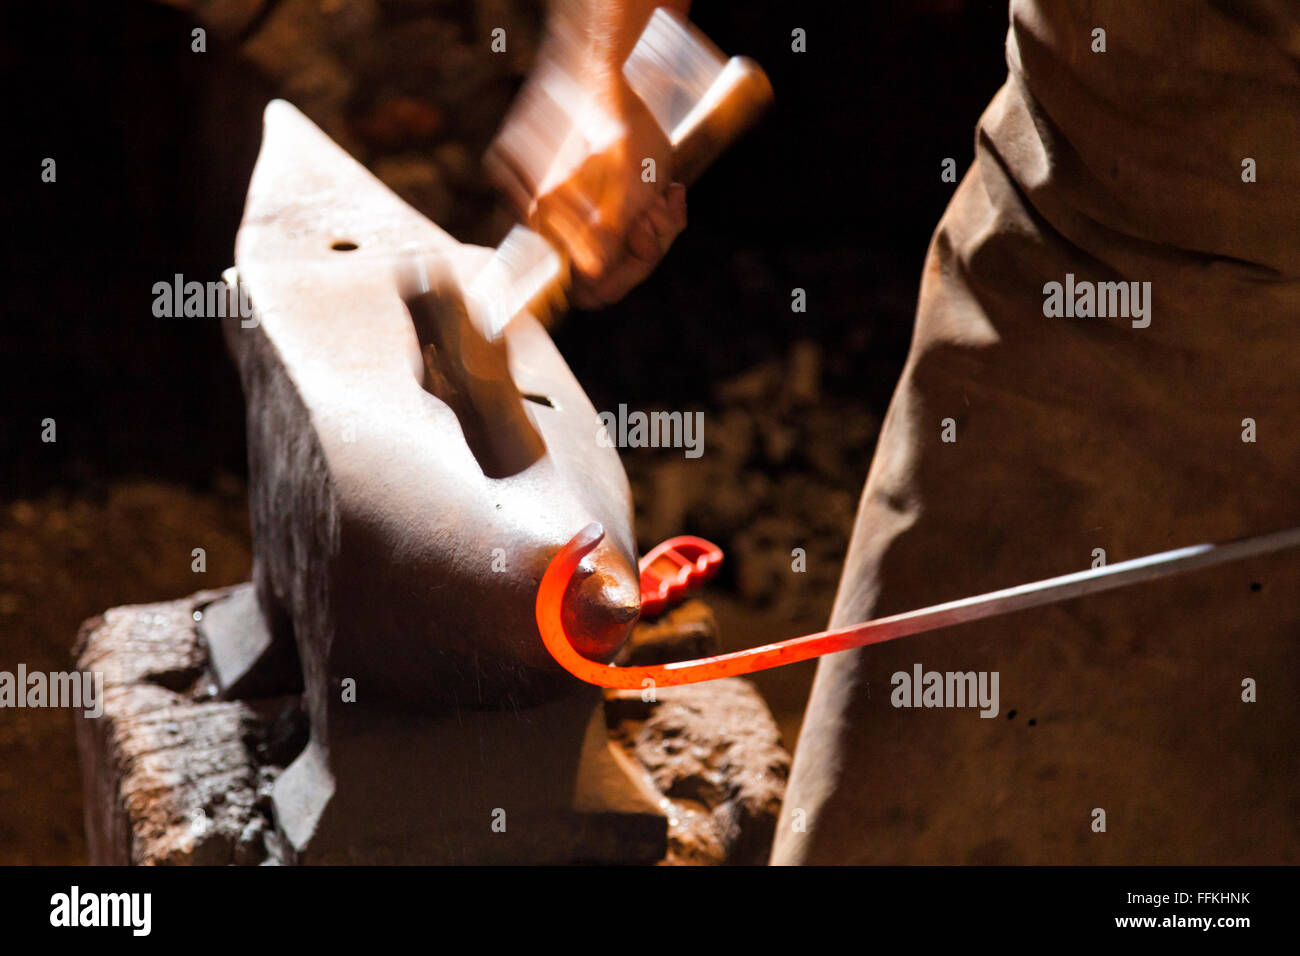 Blacksmith forging steel with hammer and anvil Stock Photo